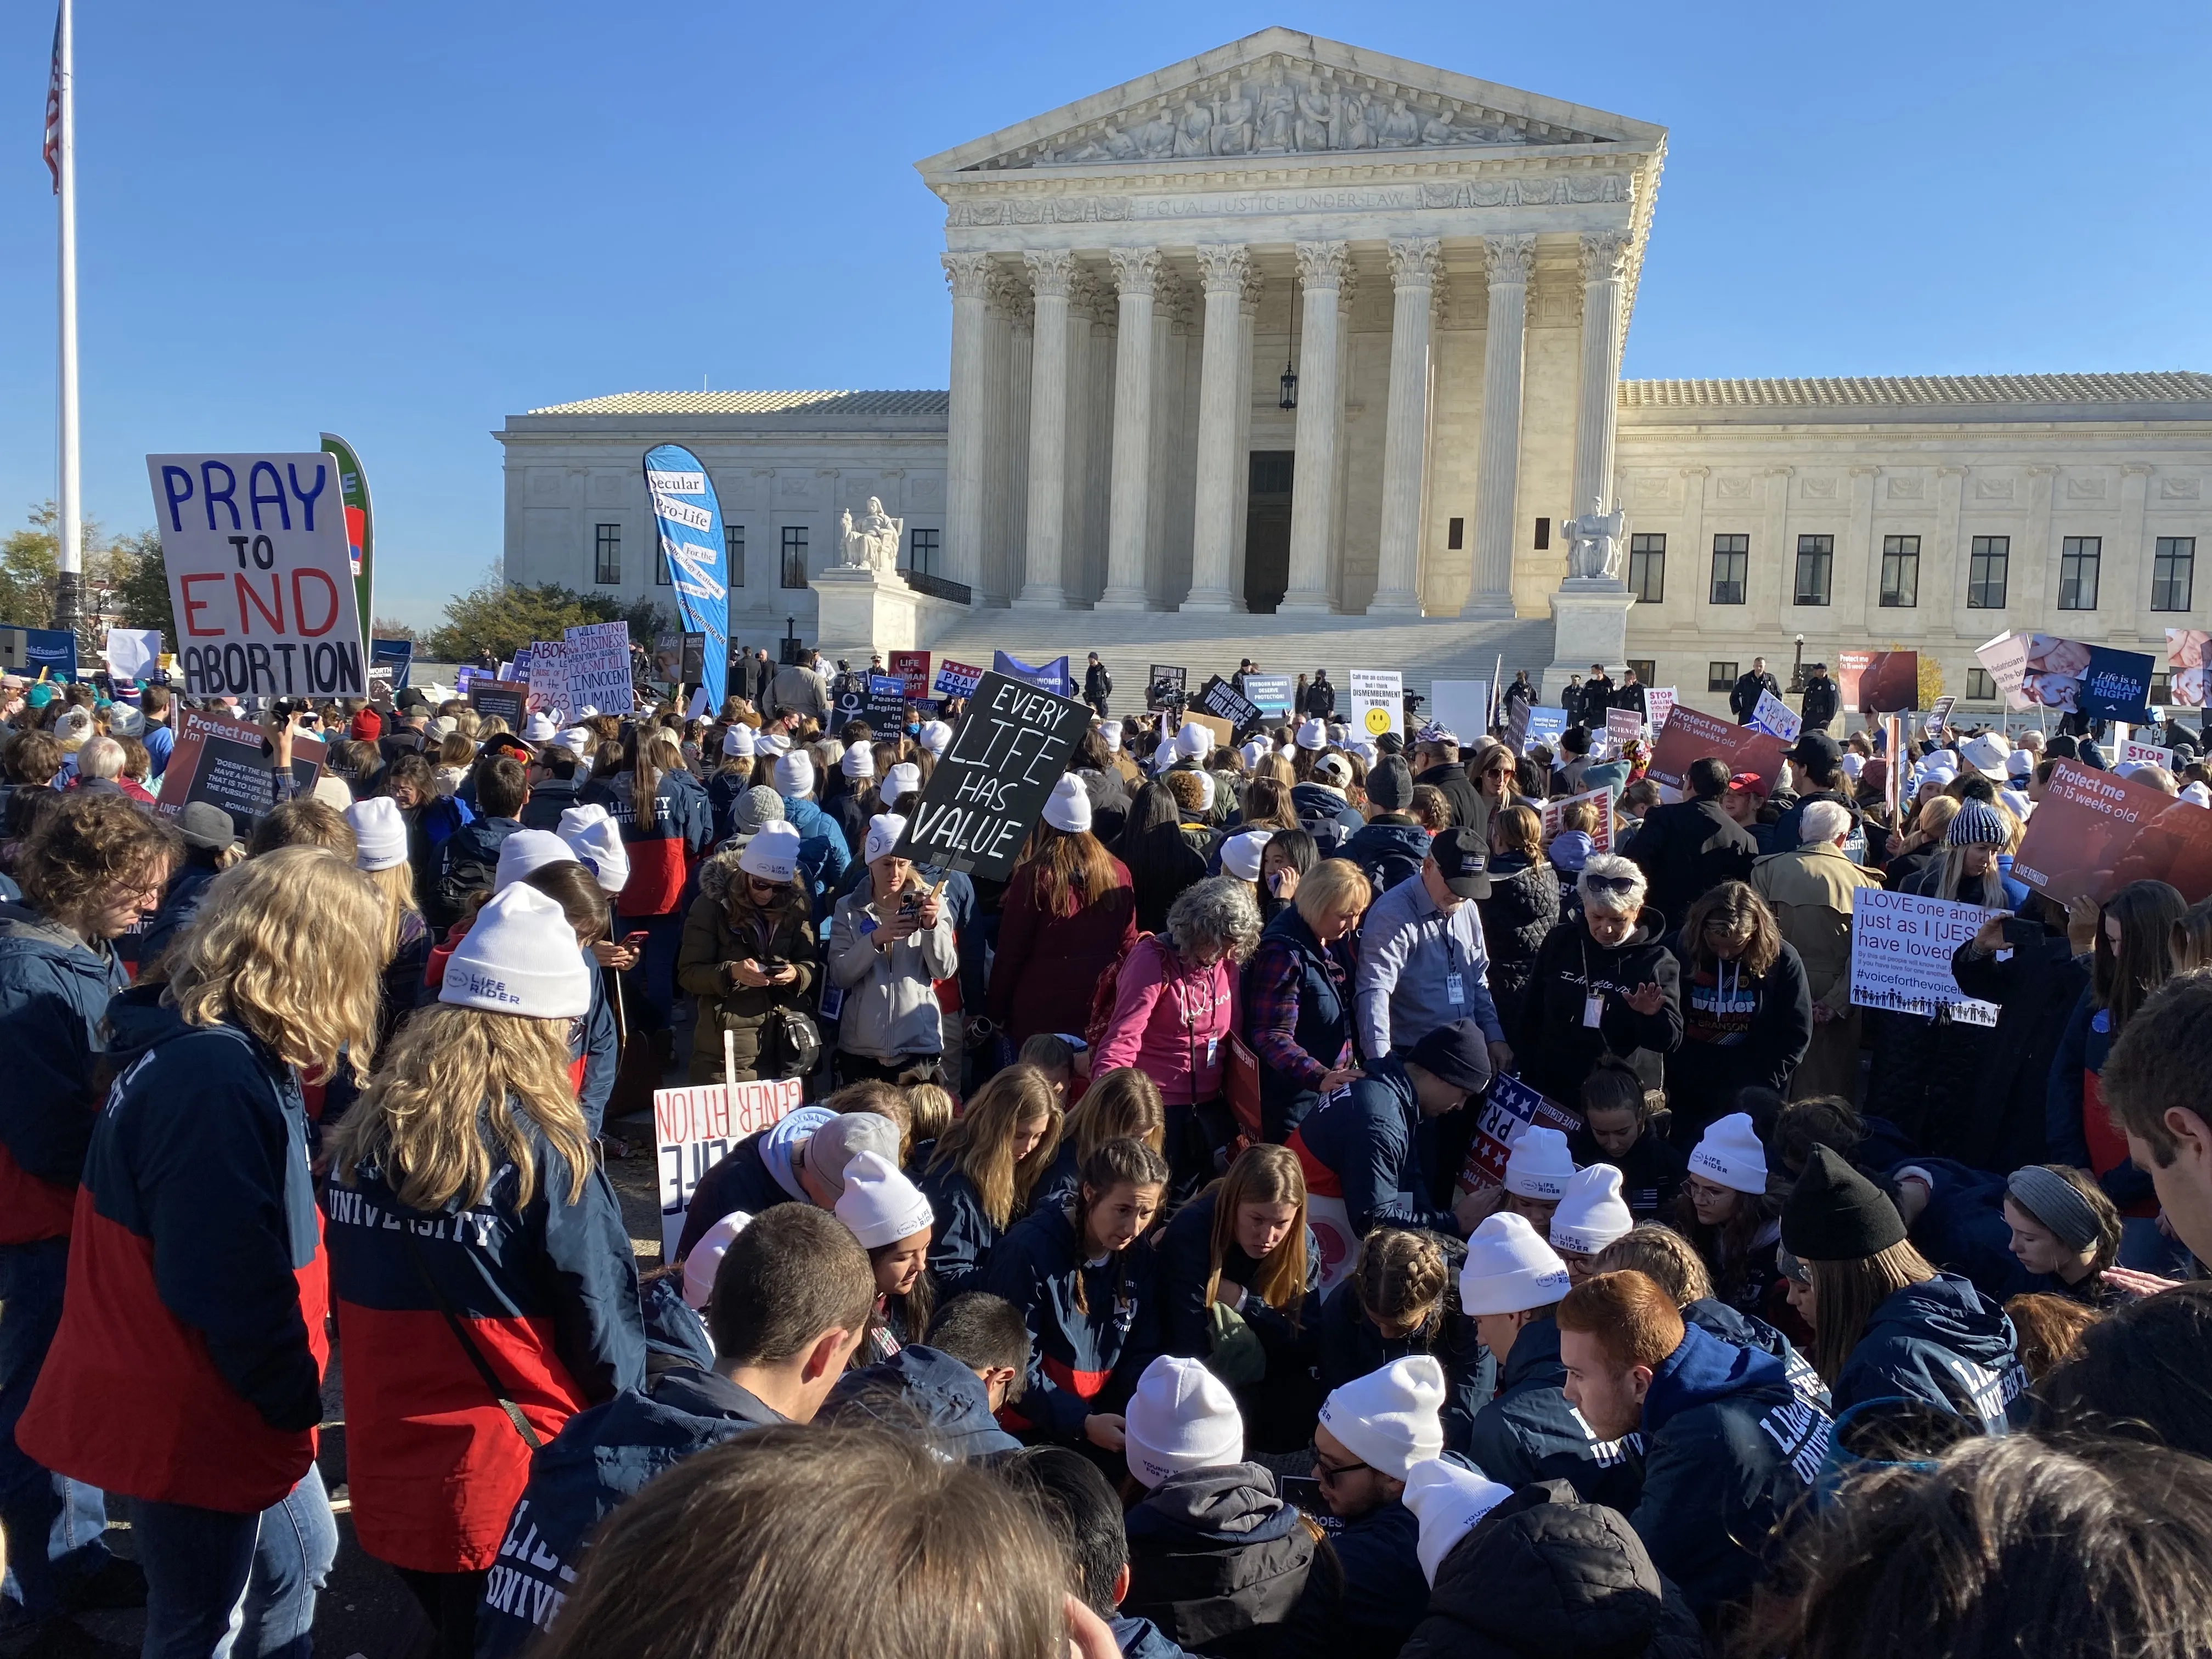 Students from Liberty University pray in front of the U.S. Supreme Court during oral arguments in the Dobbs v. Jackson Women's Health Organization abortion case on Dec. 1, 2021.?w=200&h=150